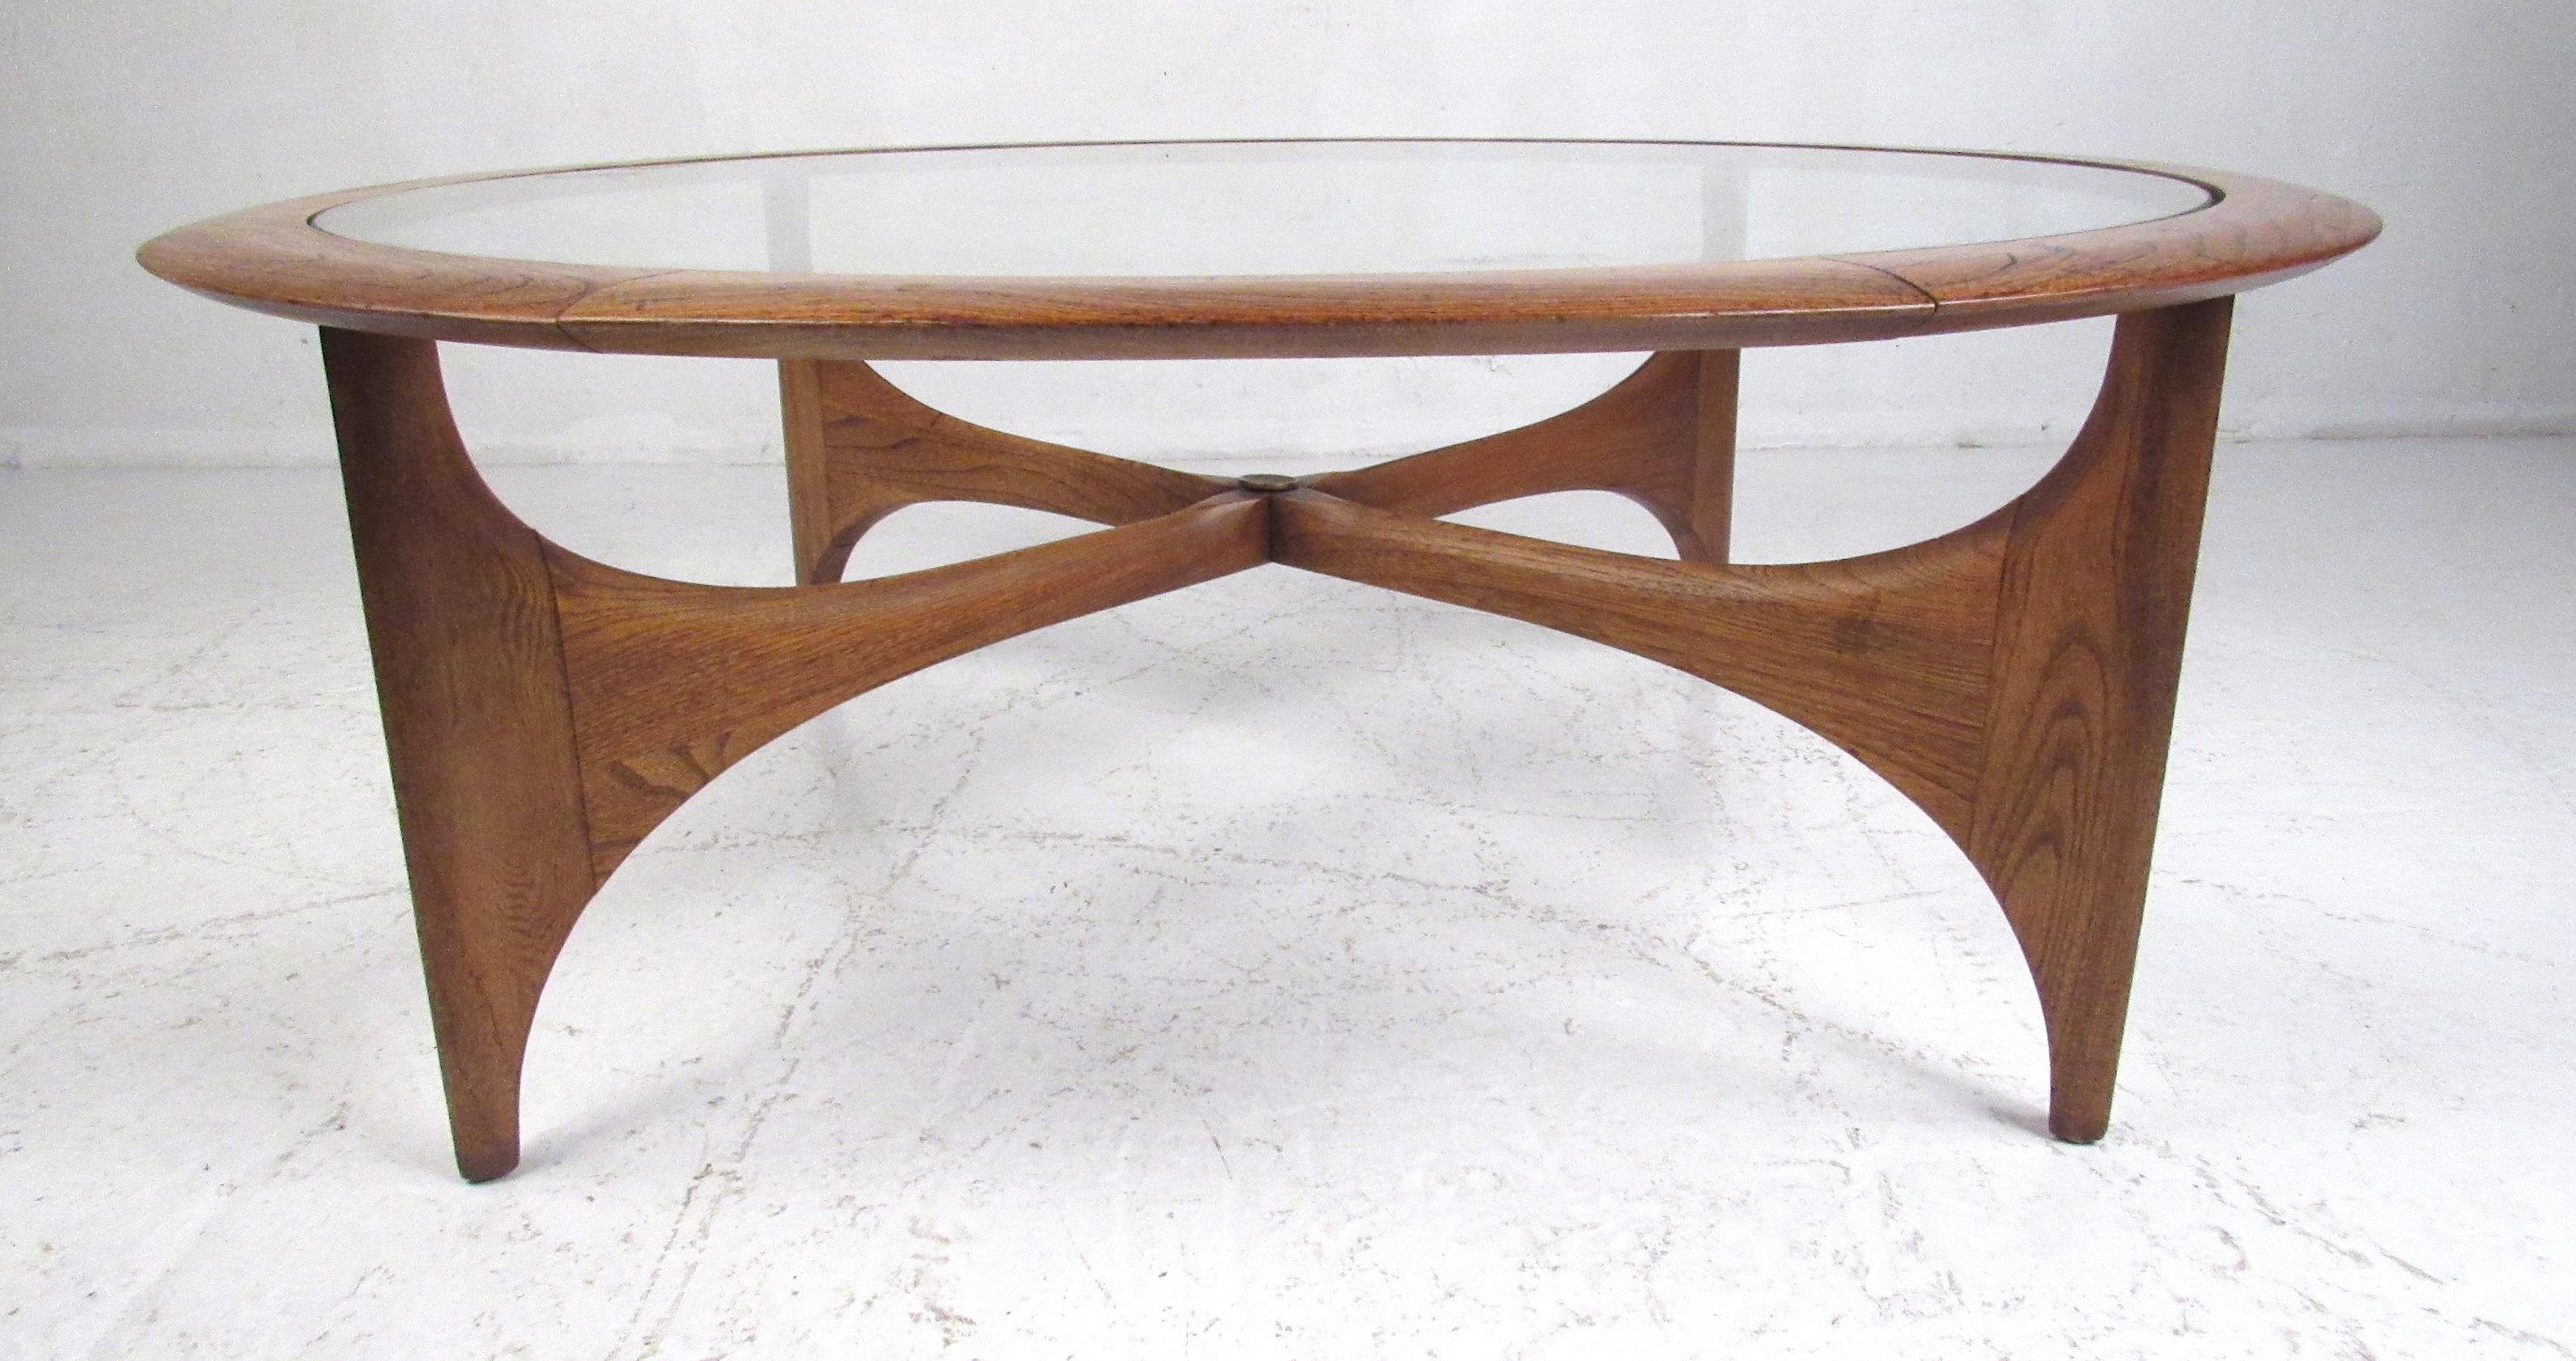 Rare round sculptural coffee table by Lane Altavista. Classic midcentury styling. Please confirm item location (NY or NJ) with dealer.